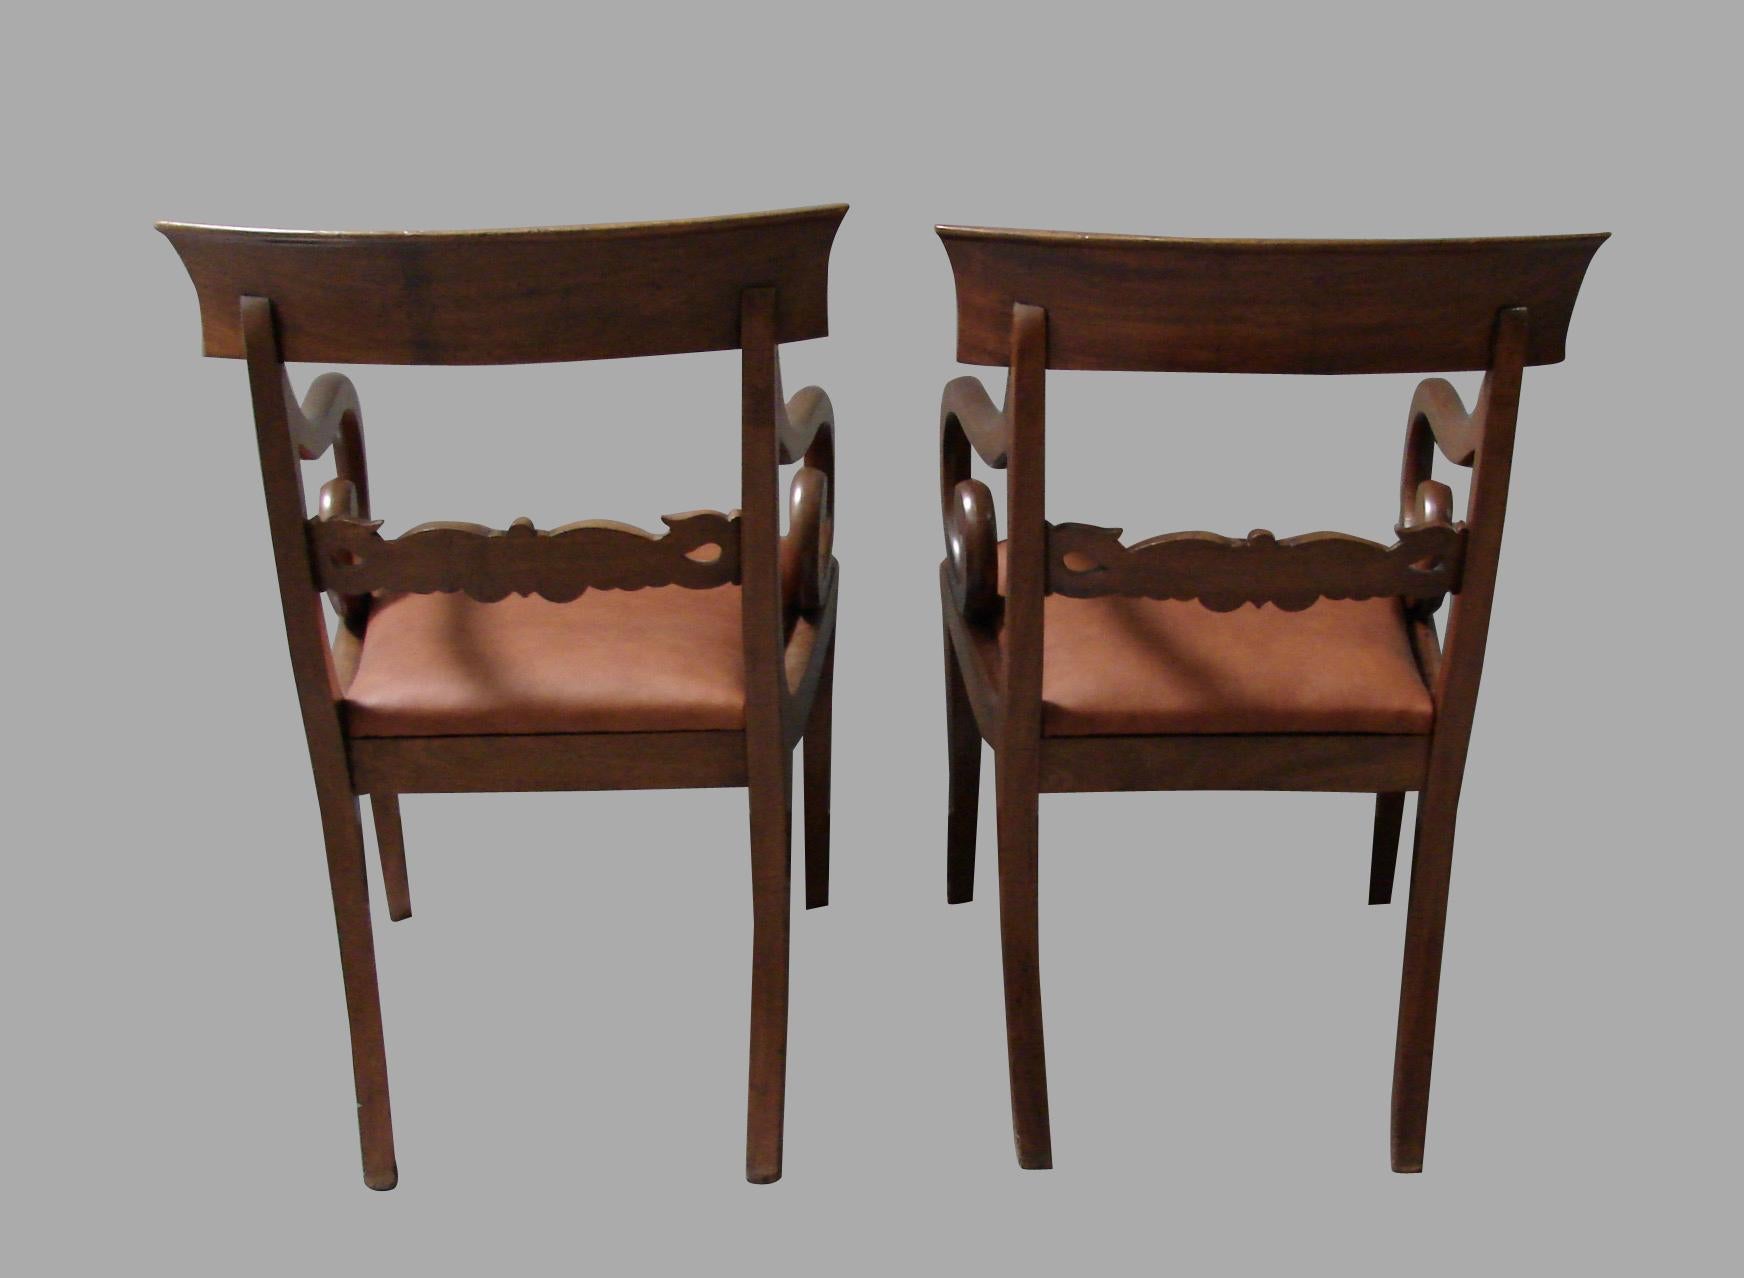 English Pair of Regency Mahogany Armchairs with Scroll Arms and Leather Seats